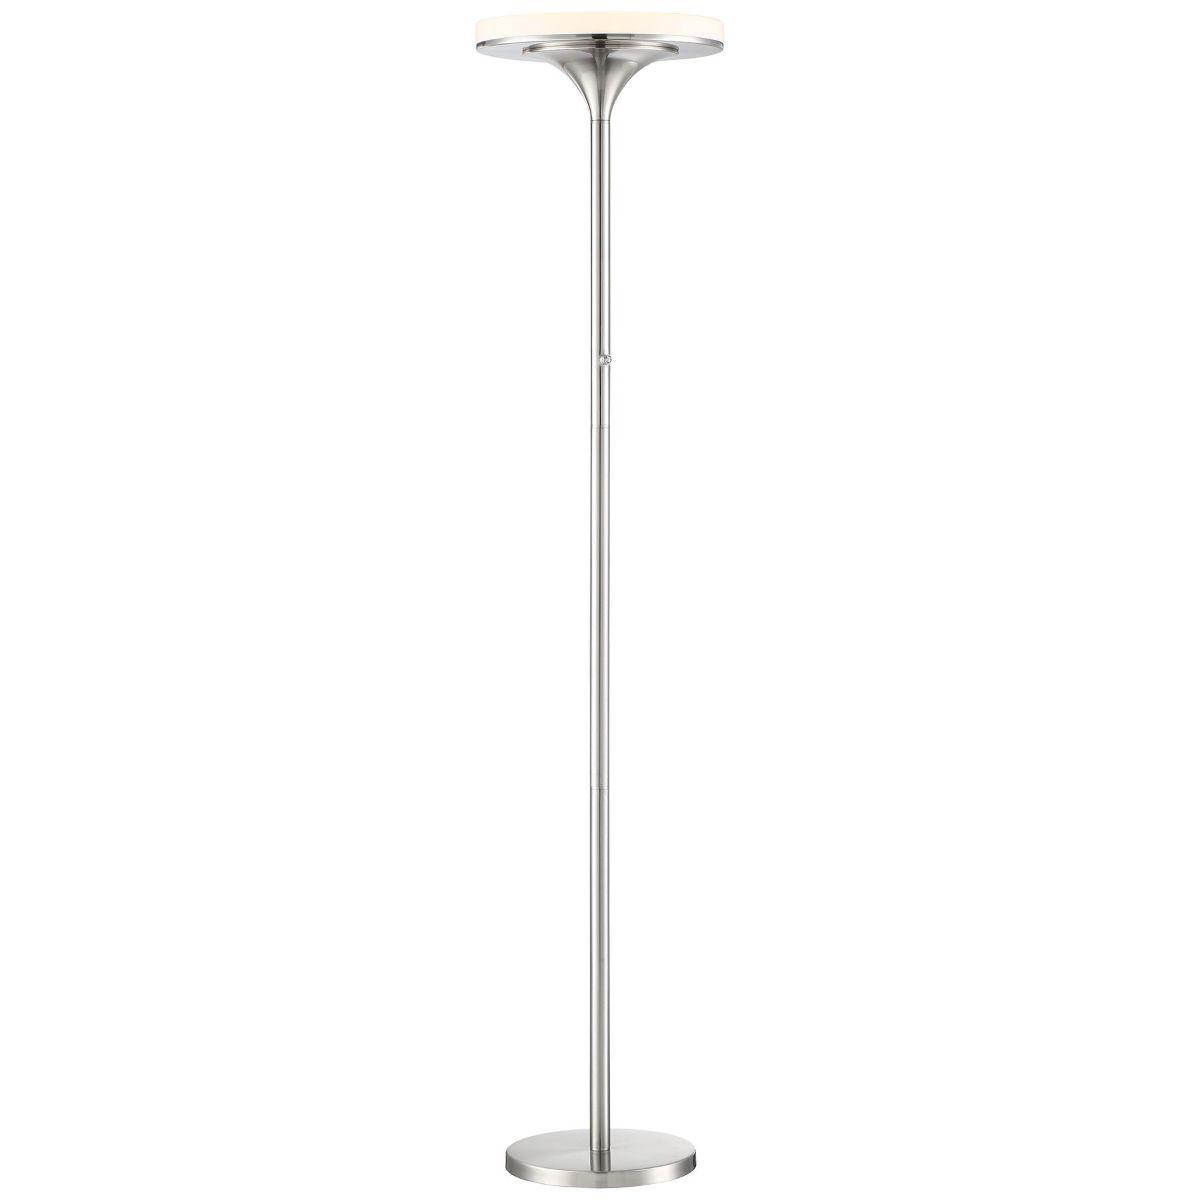 U.H.O LED Torchiere Floor Lamp Brushed Nickel with a White Acrylic Shade